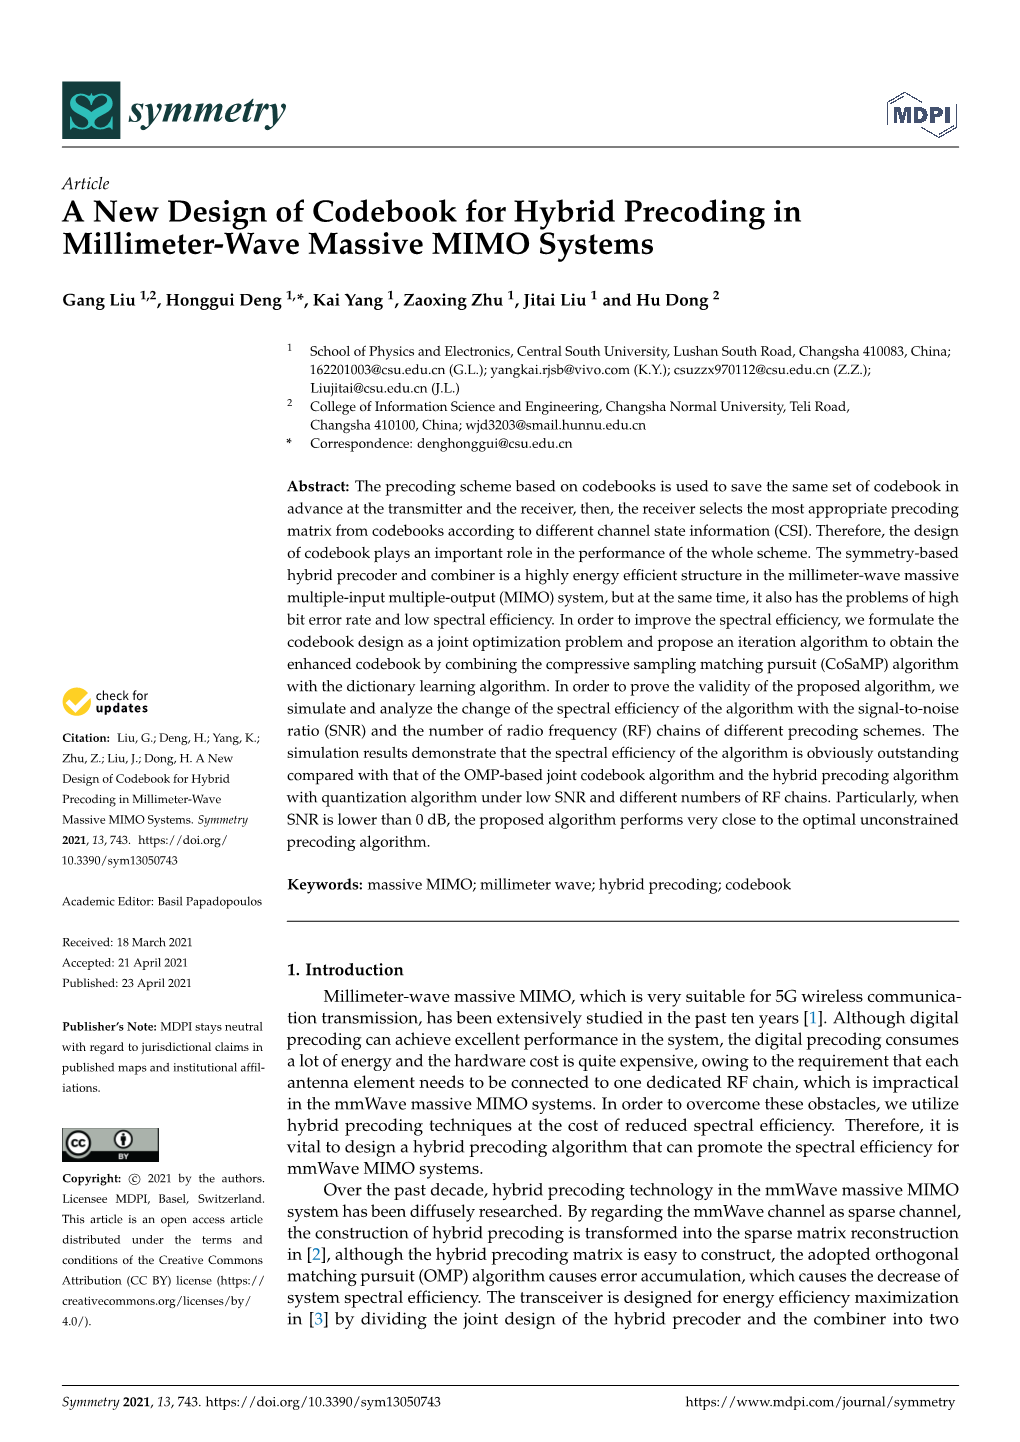 A New Design of Codebook for Hybrid Precoding in Millimeter-Wave Massive MIMO Systems